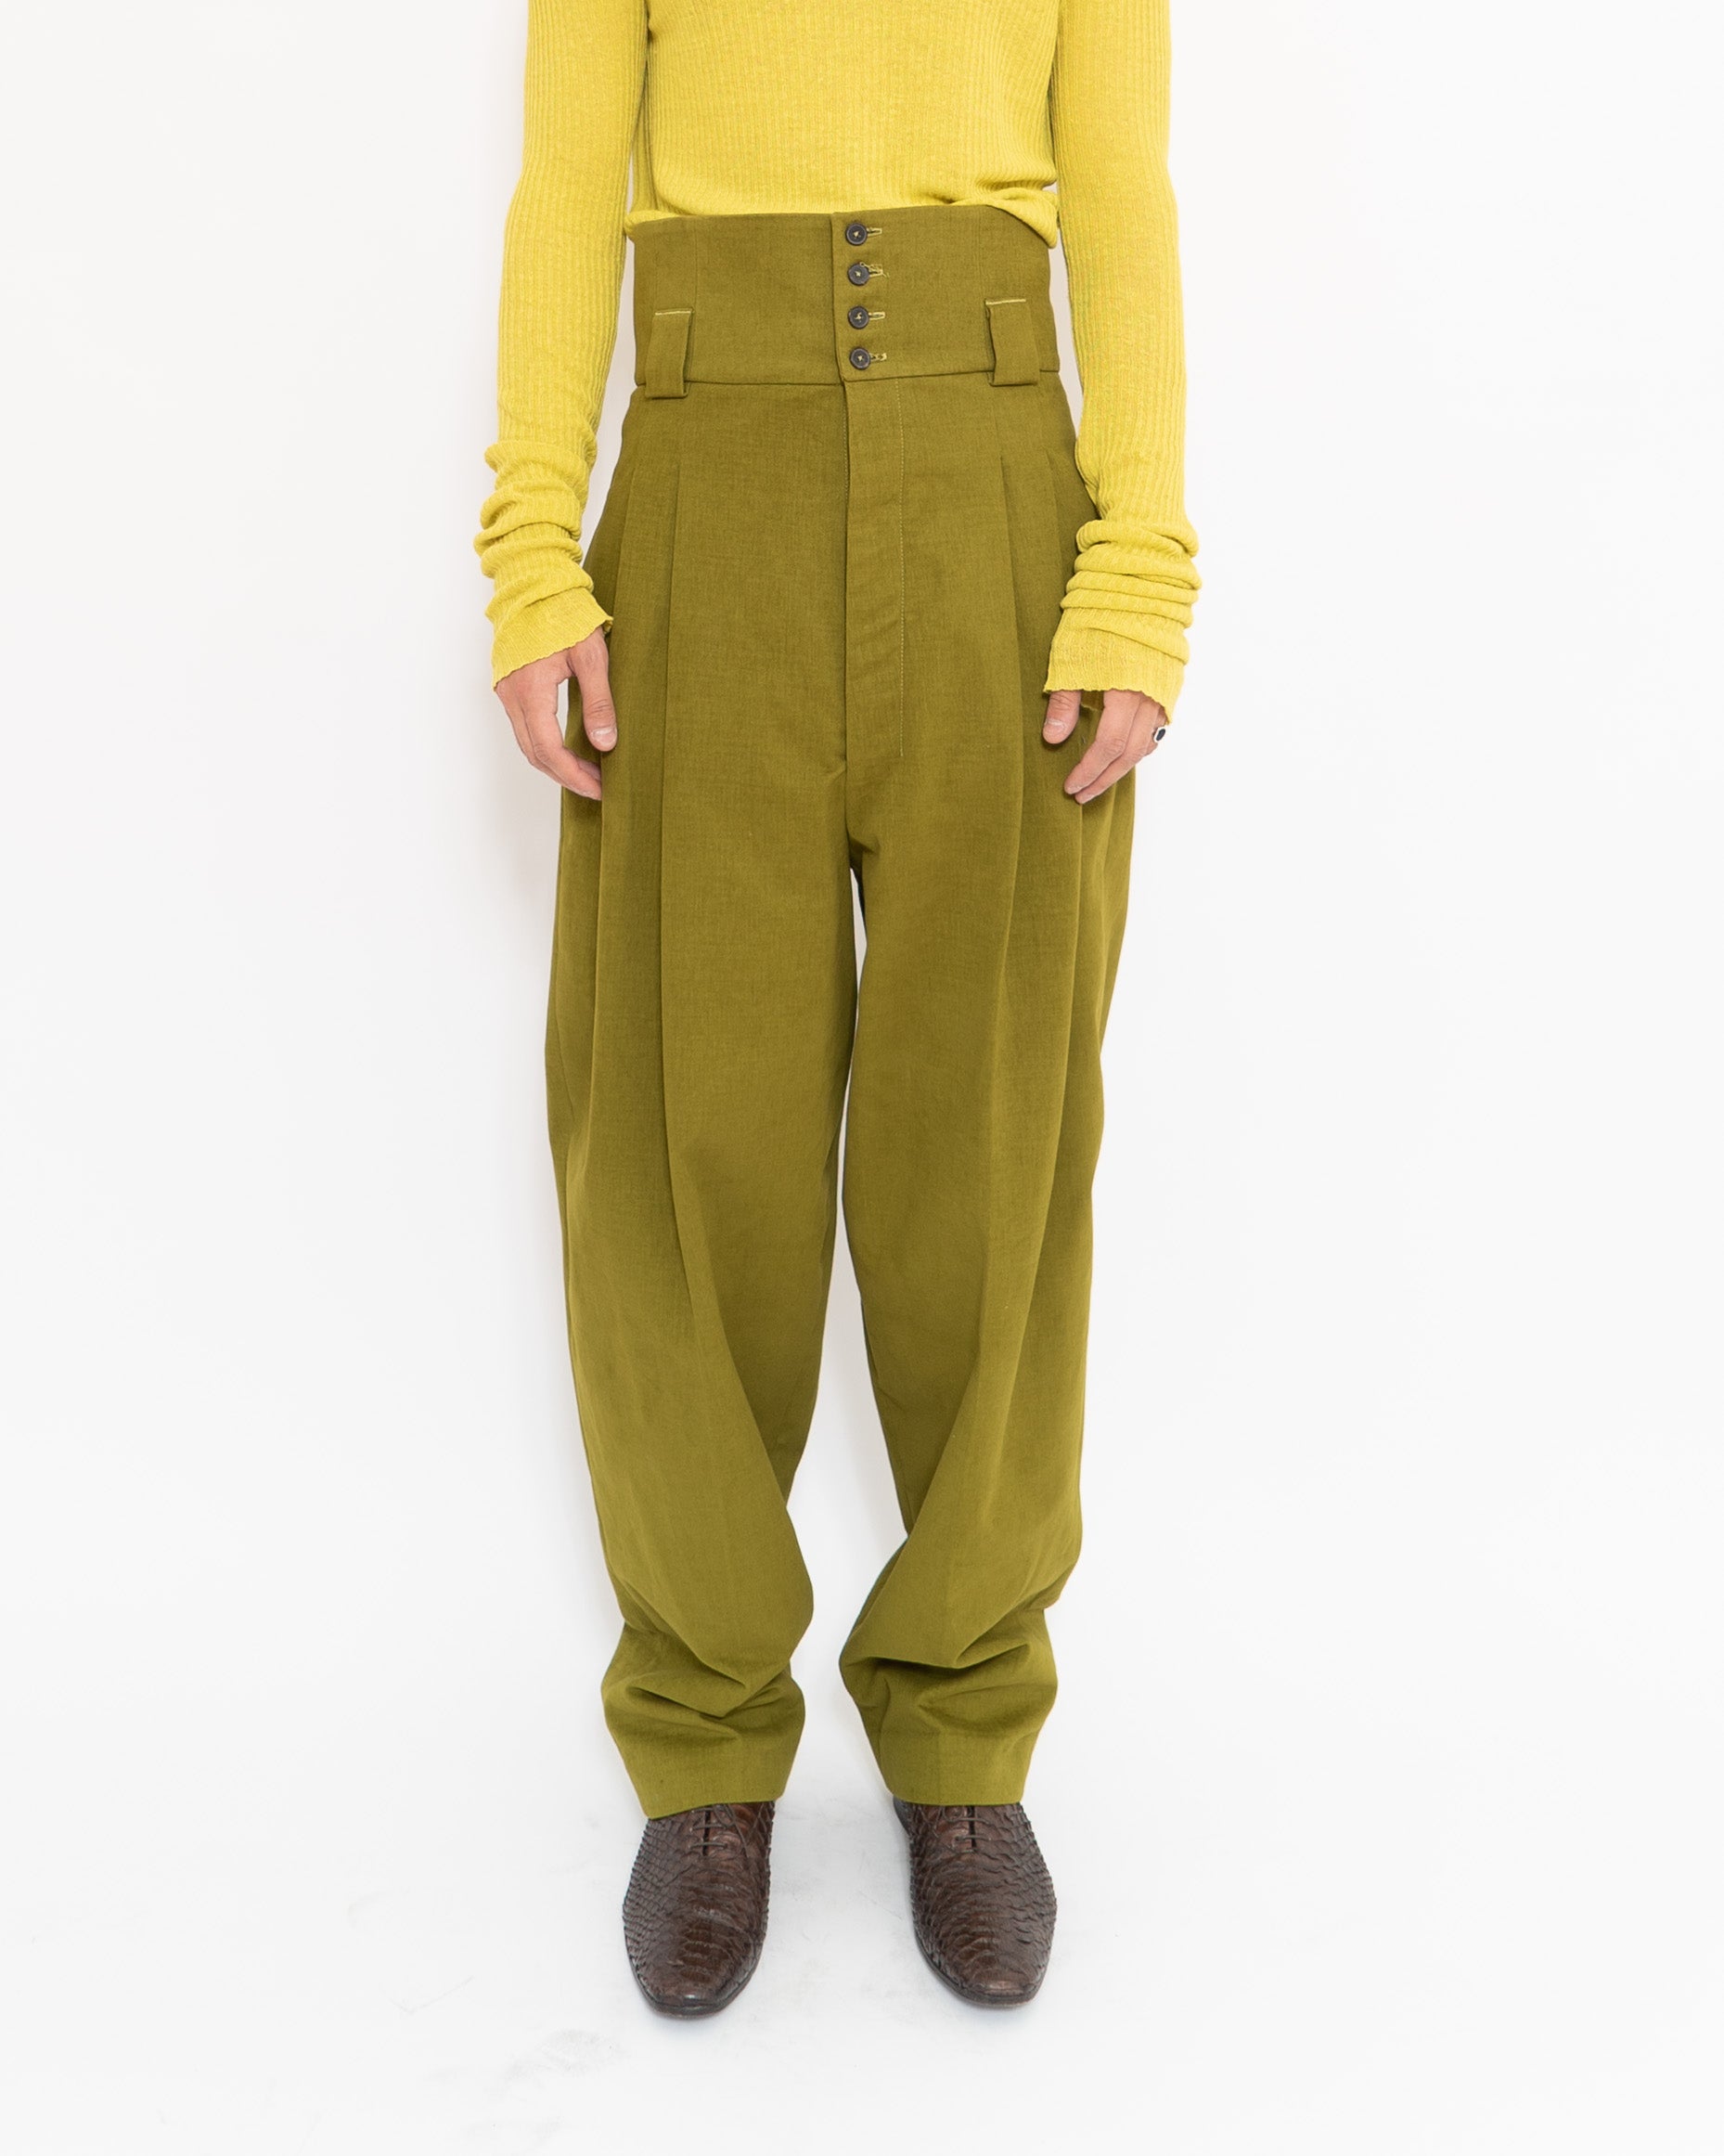 FW20 Poison Green Oversized Trousers Sample